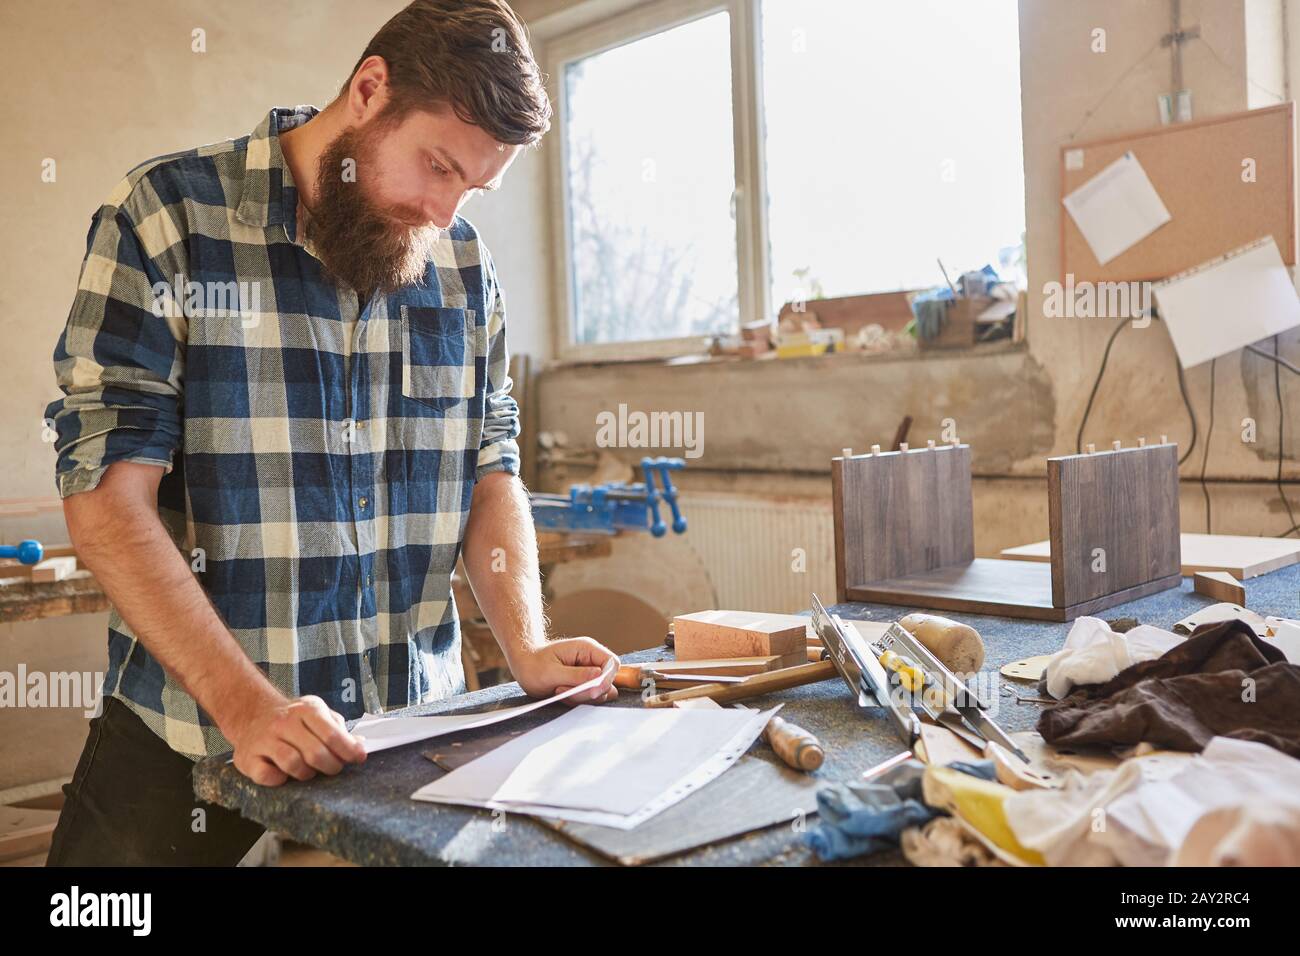 Carpenter with checklist on a piece of paper works order in the carpentry Stock Photo